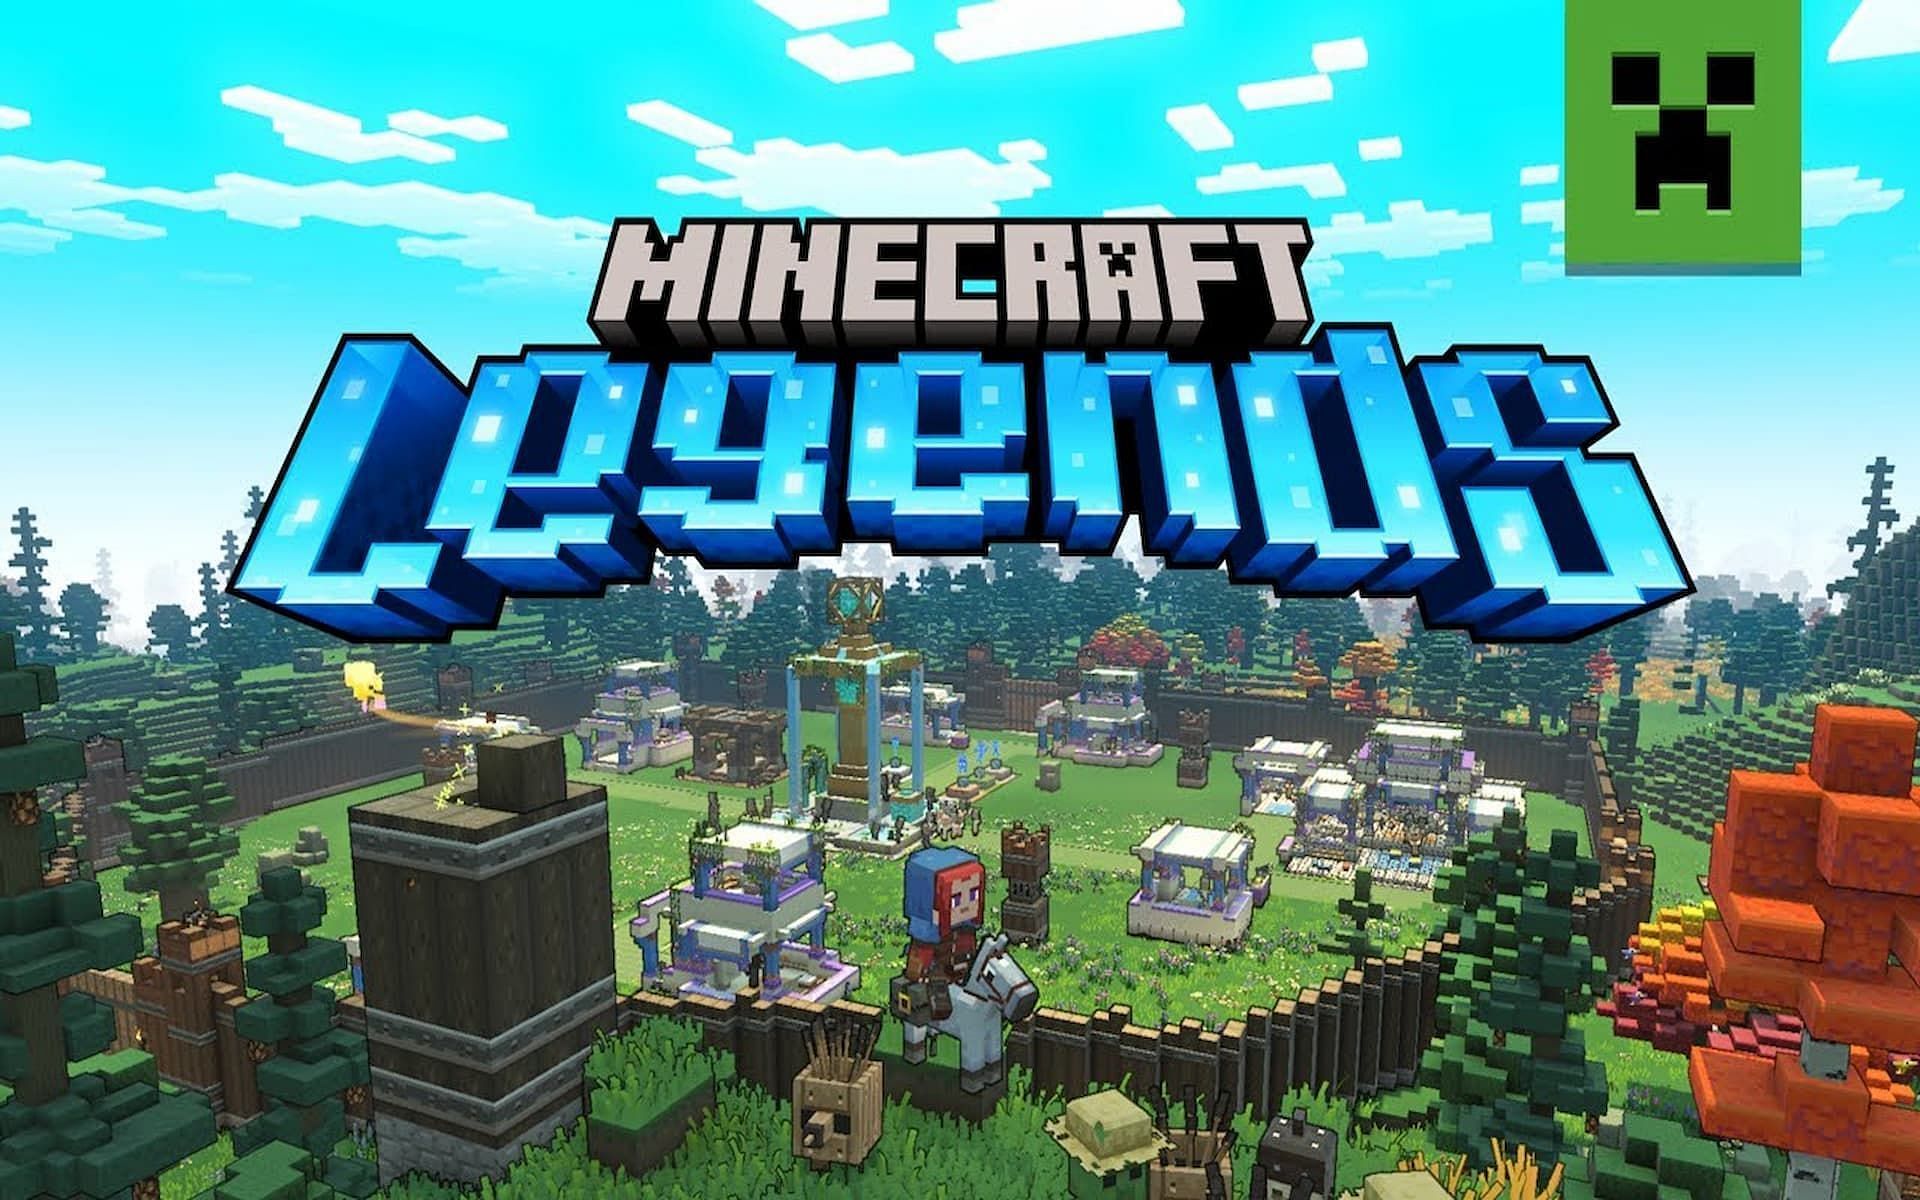 Fans can live out large scale battles in the Minecraft universe with Minecraft Legends (Image via Mojang)